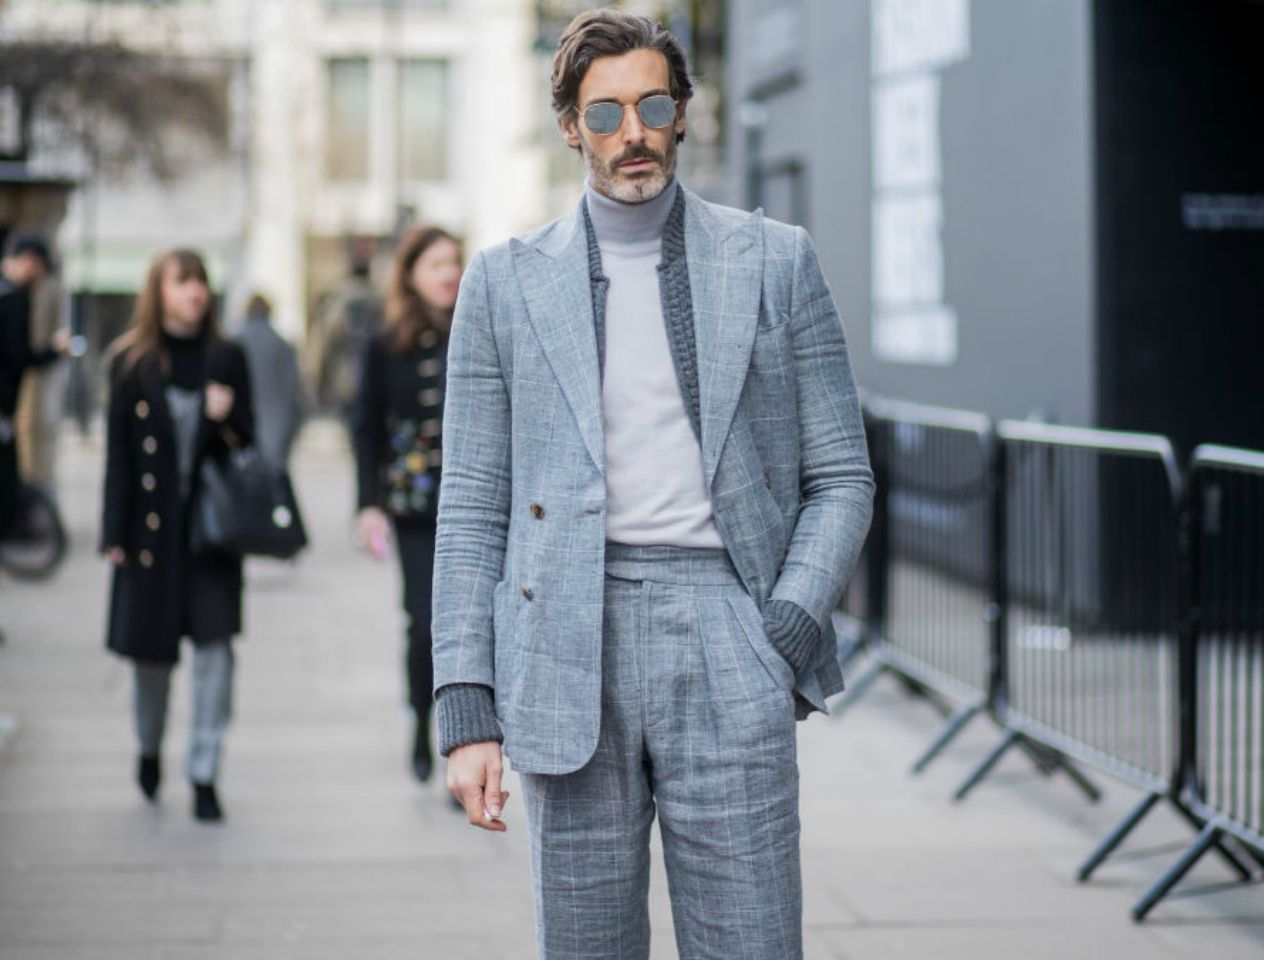 How to wear a suit this winter